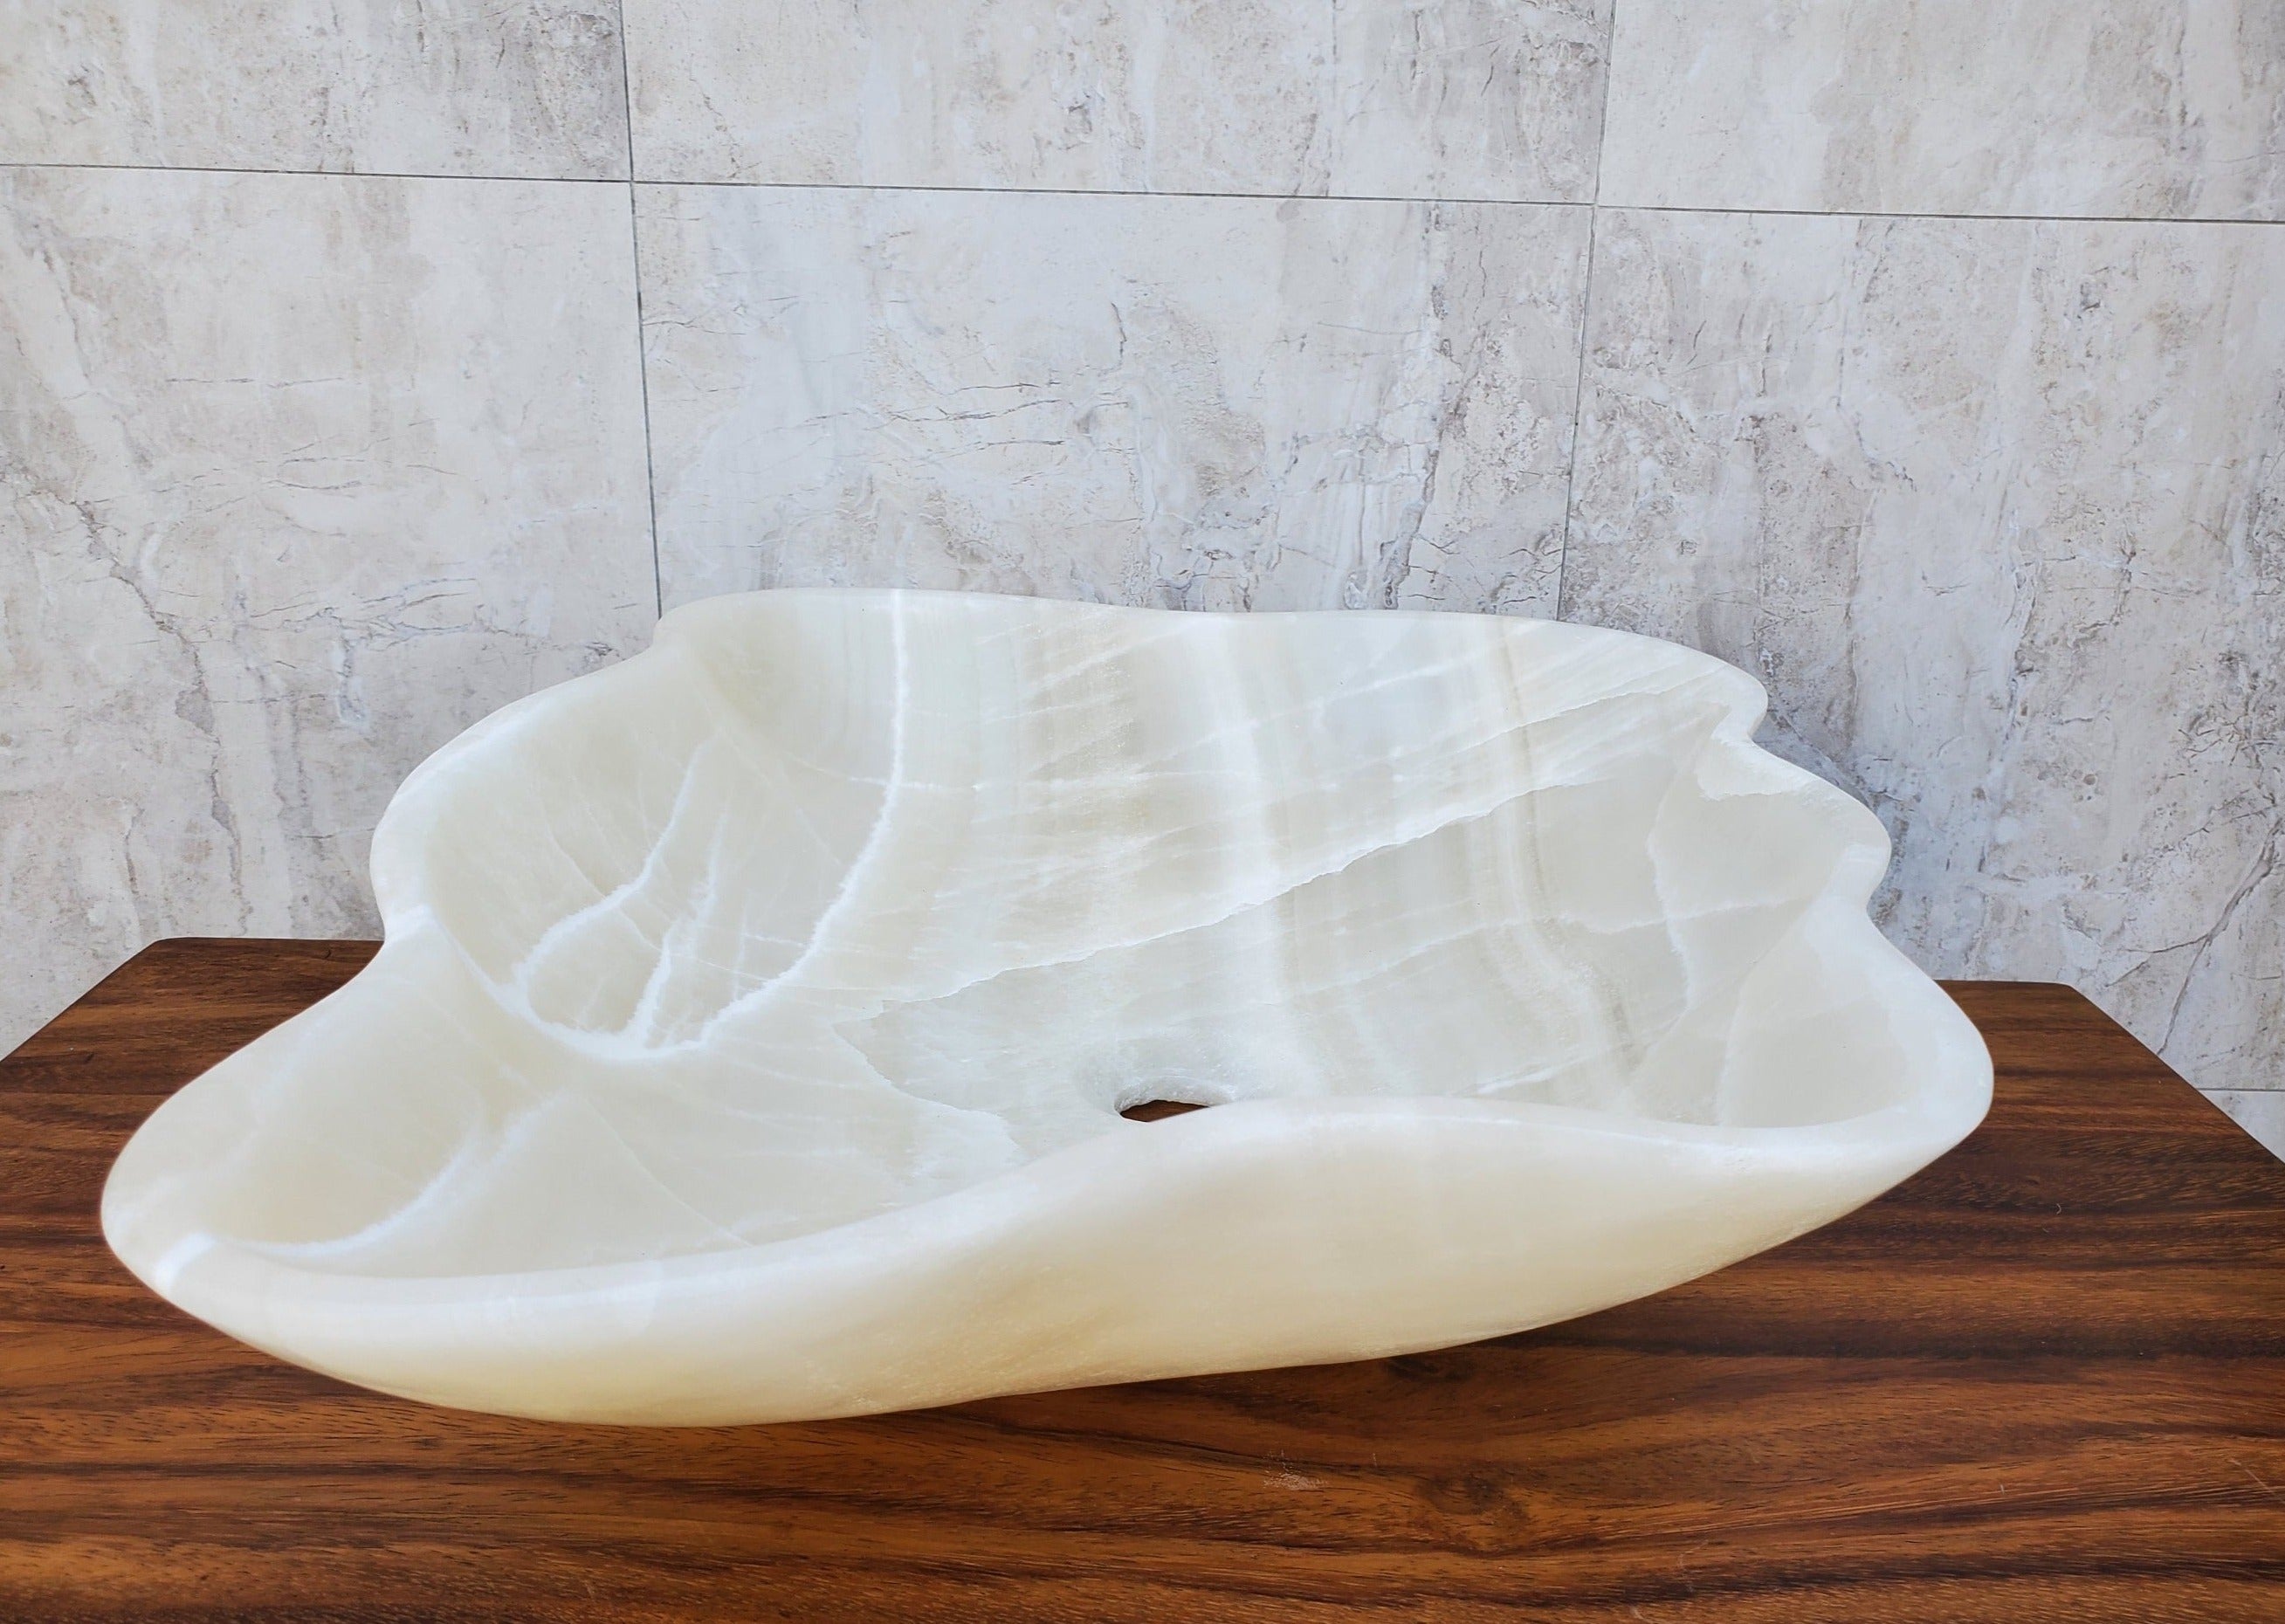 White Polished Onyx Stone Vessel Bathroom Sink. Above Counter. It is one of a kind and a beautiful work of art. Handmade in Mexico. Hand Finished in the USA. Ships from the USA. Buy now at www.felipeandgrace.com. 